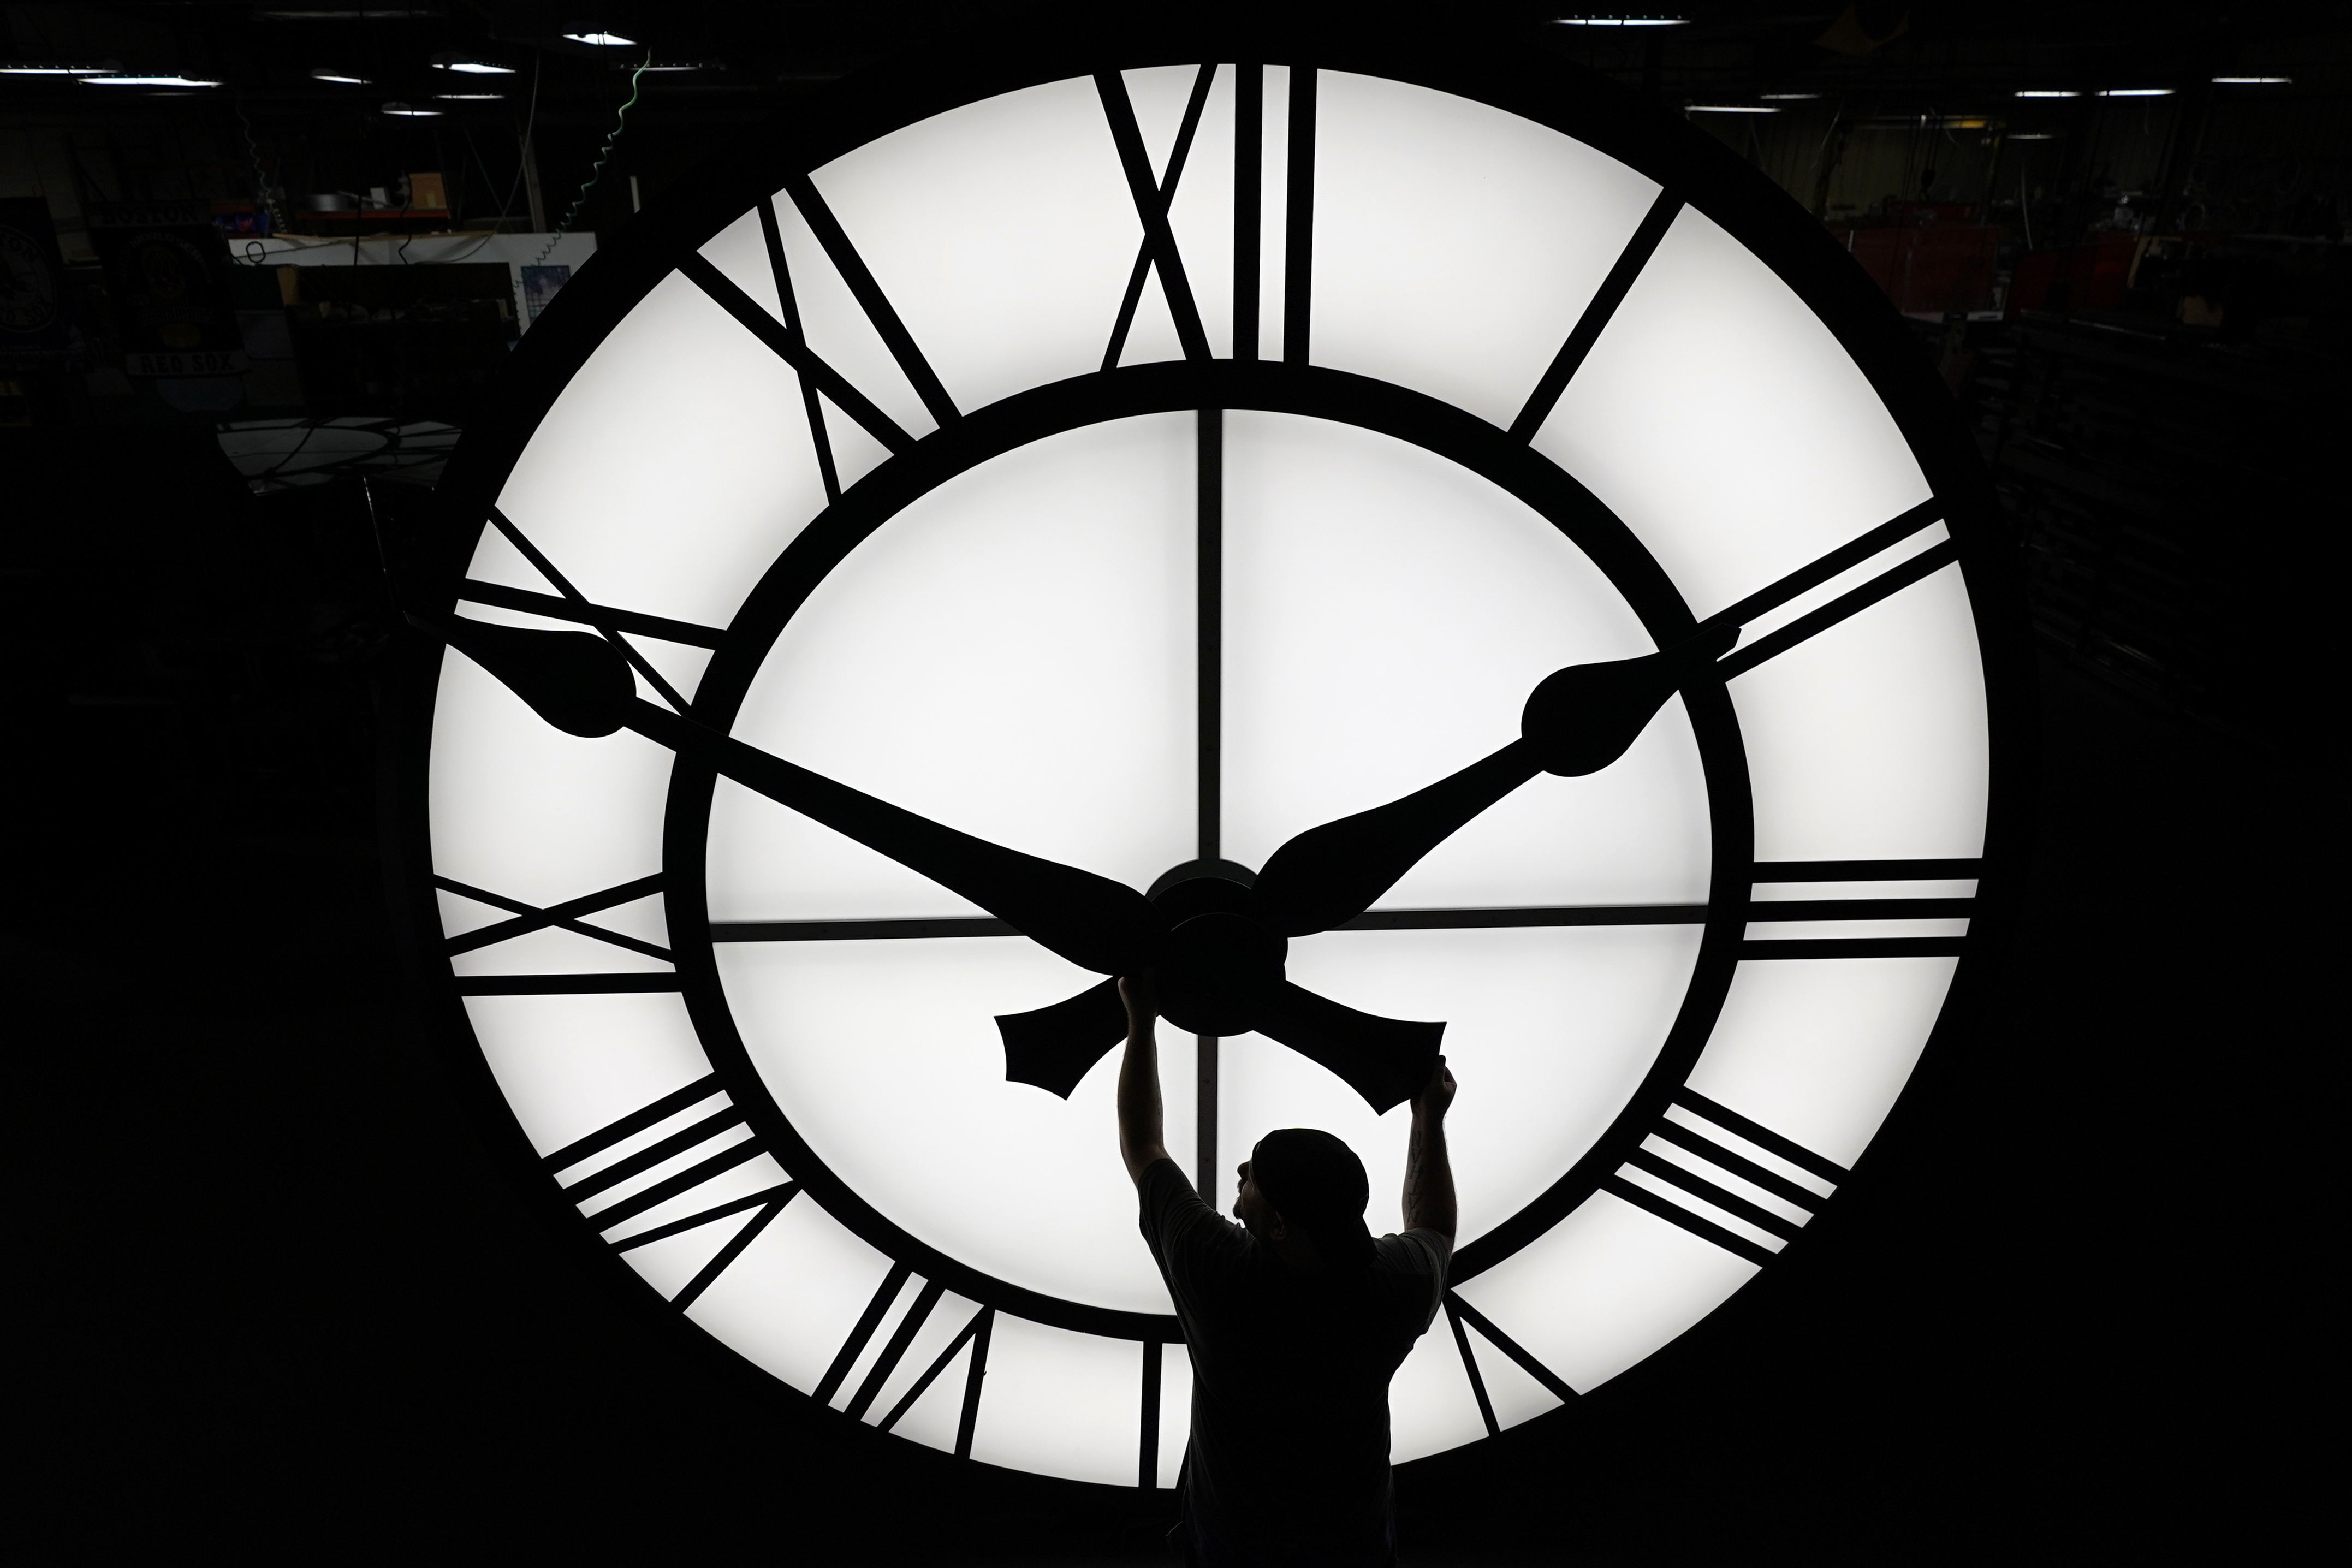 Daylight Saving Time ends: All you need to know about the annual ritual